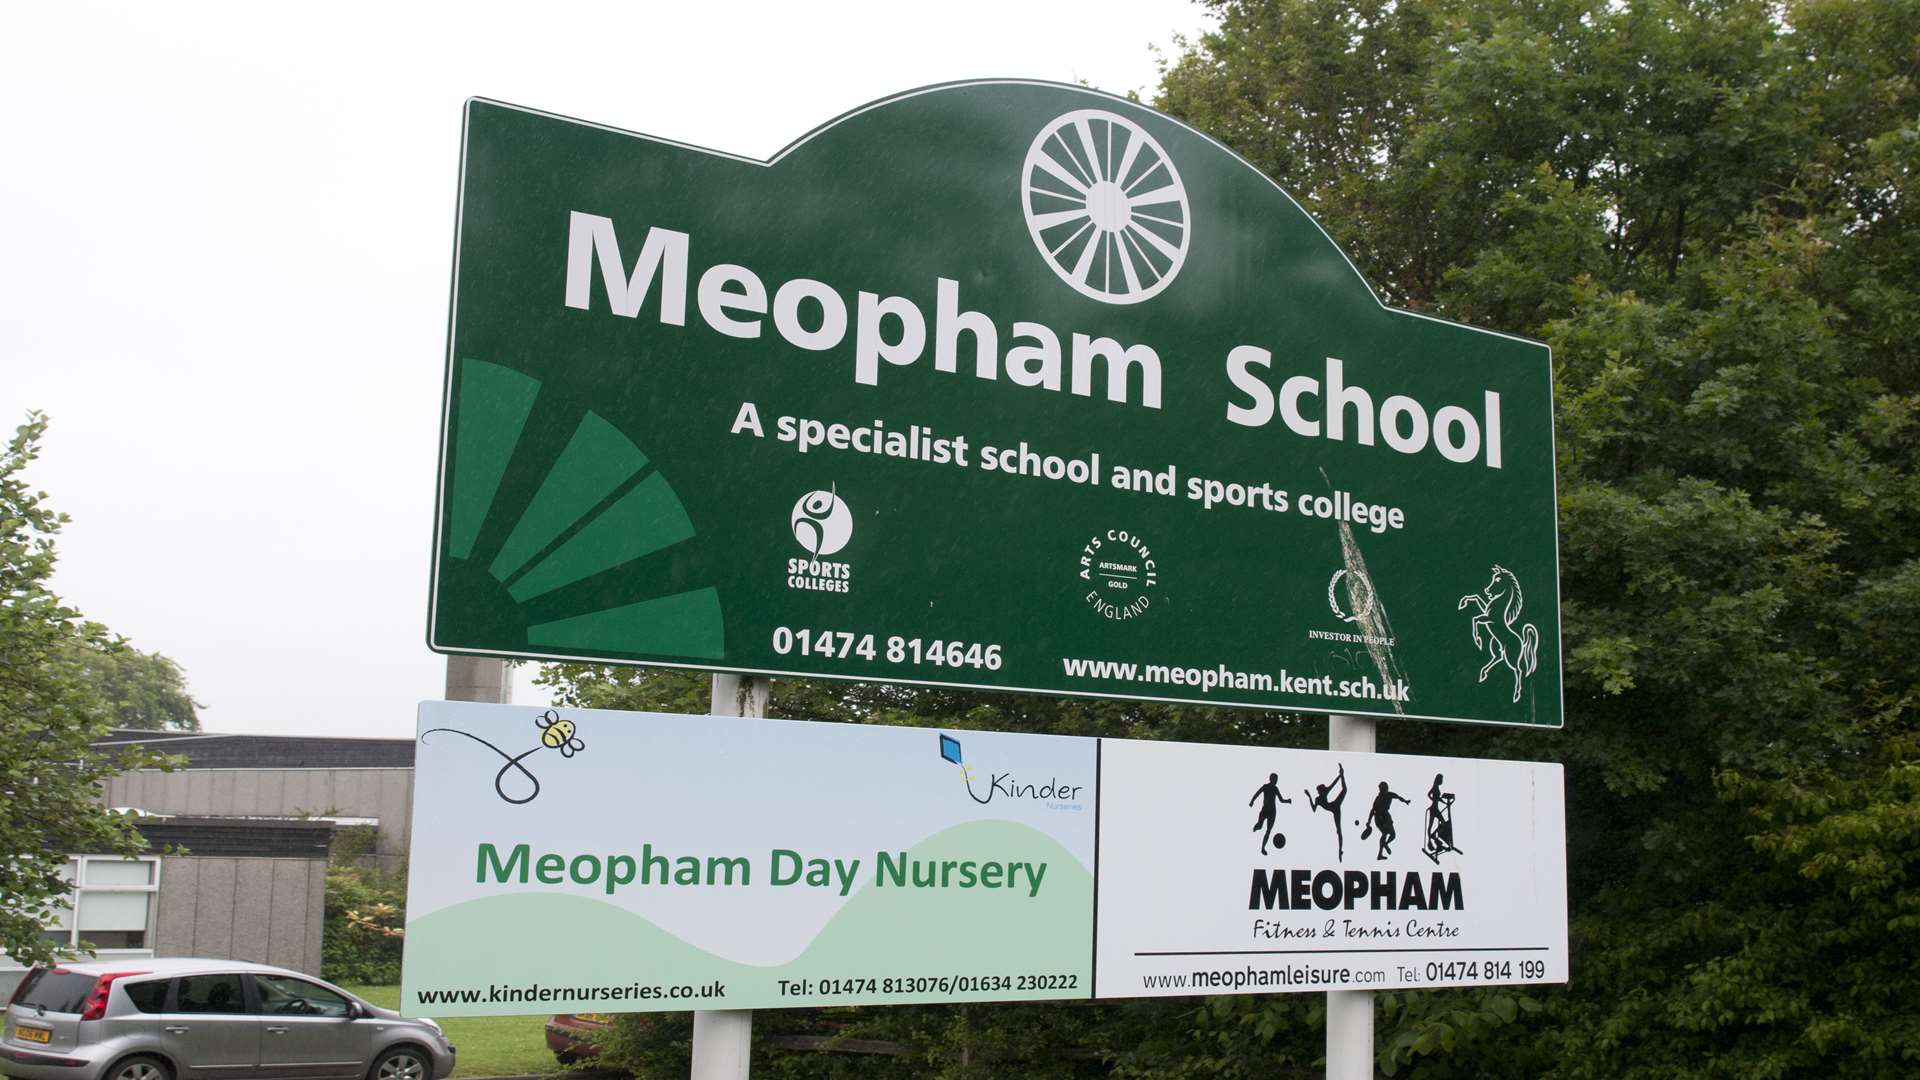 Meopham School is run by the Swale Academies Trust